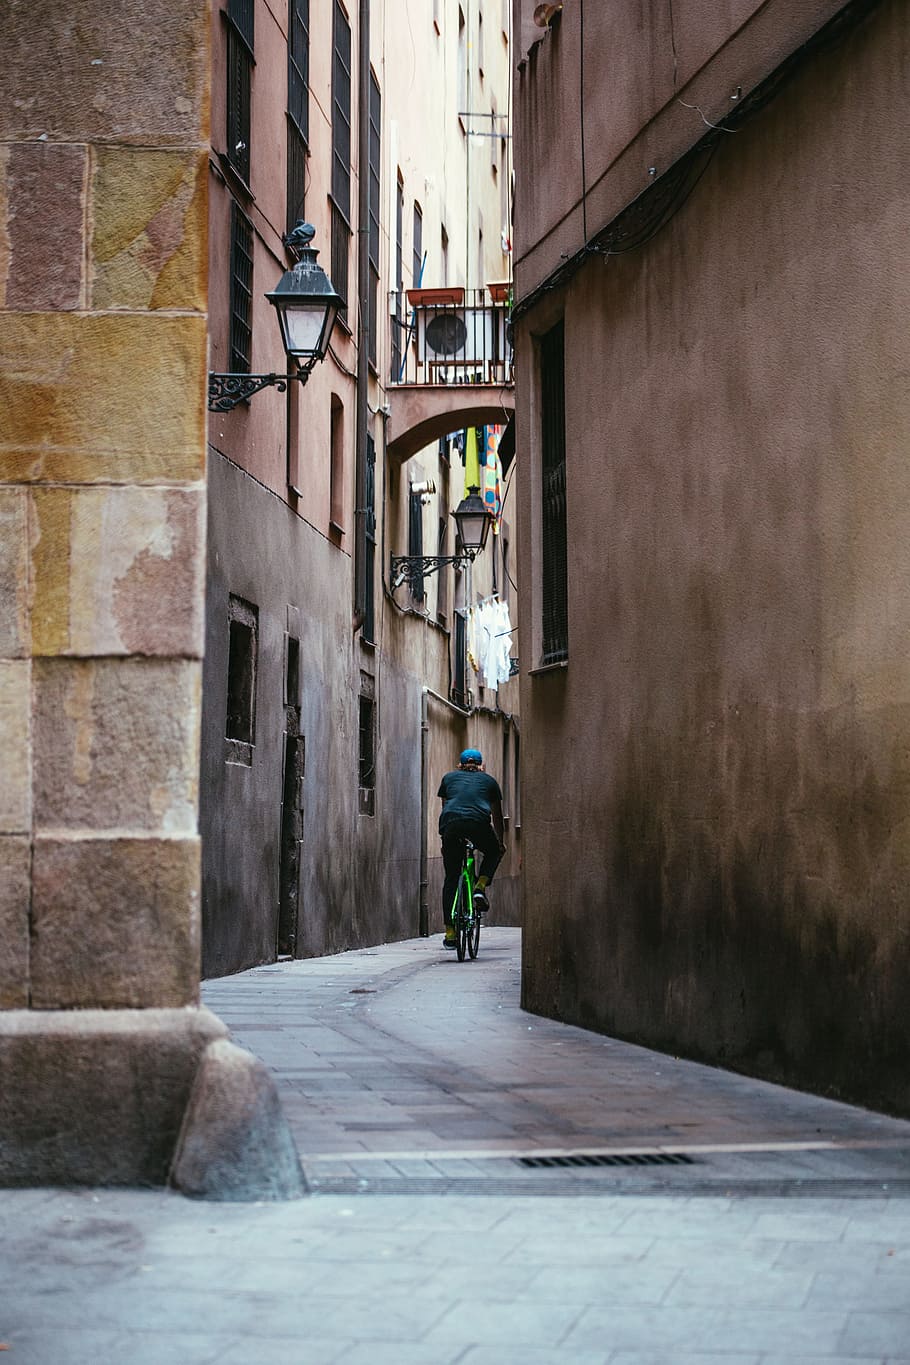 cyclist, riding, bicycle, street, Architecture, Bike, Cobblestone, Cycling, Facade, Narrow